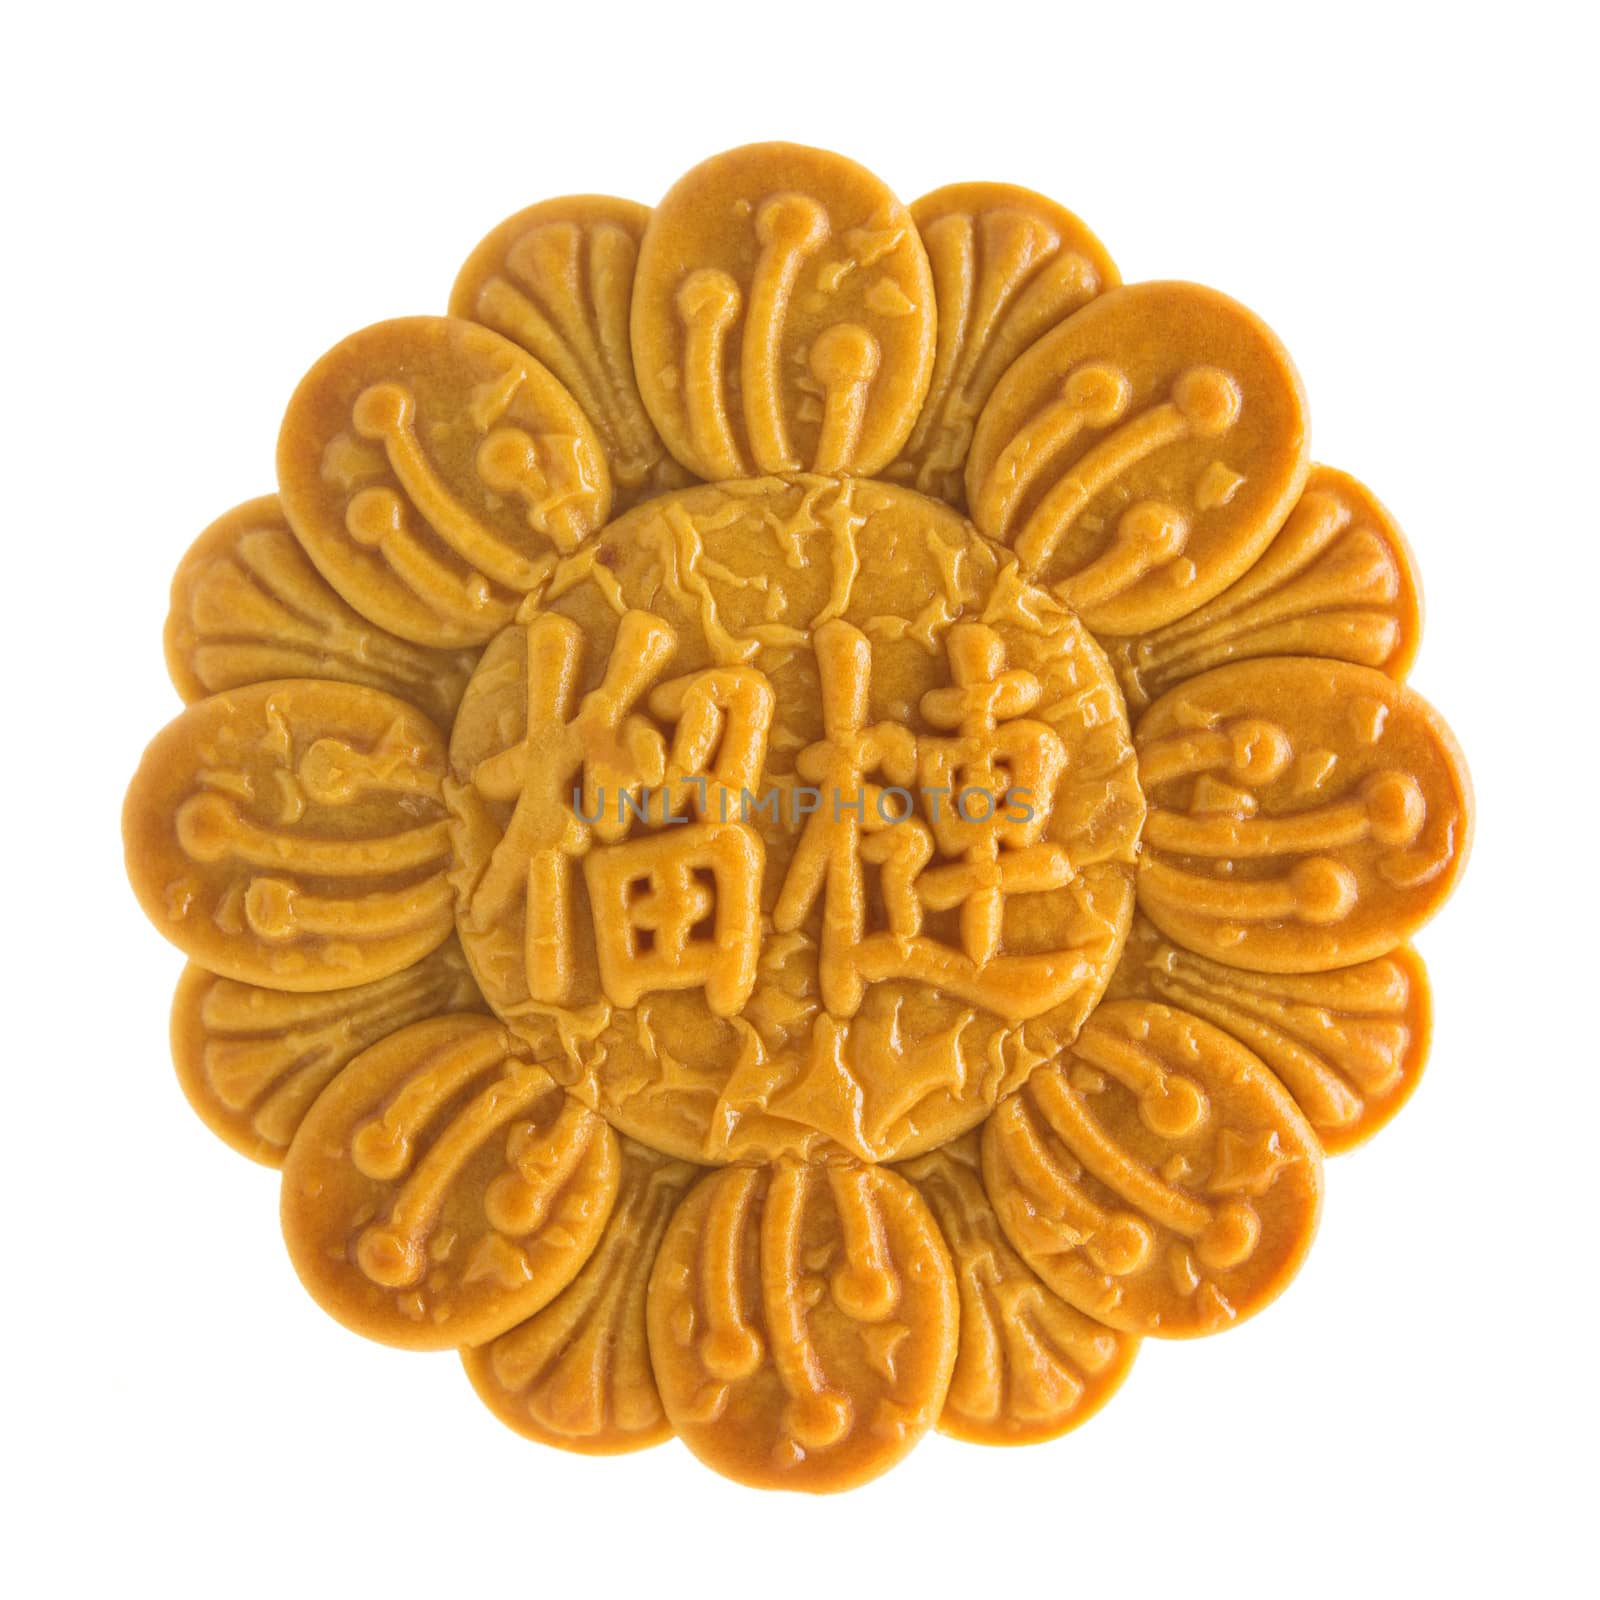 Isolated durian pure lotus paste mooncakes by szefei